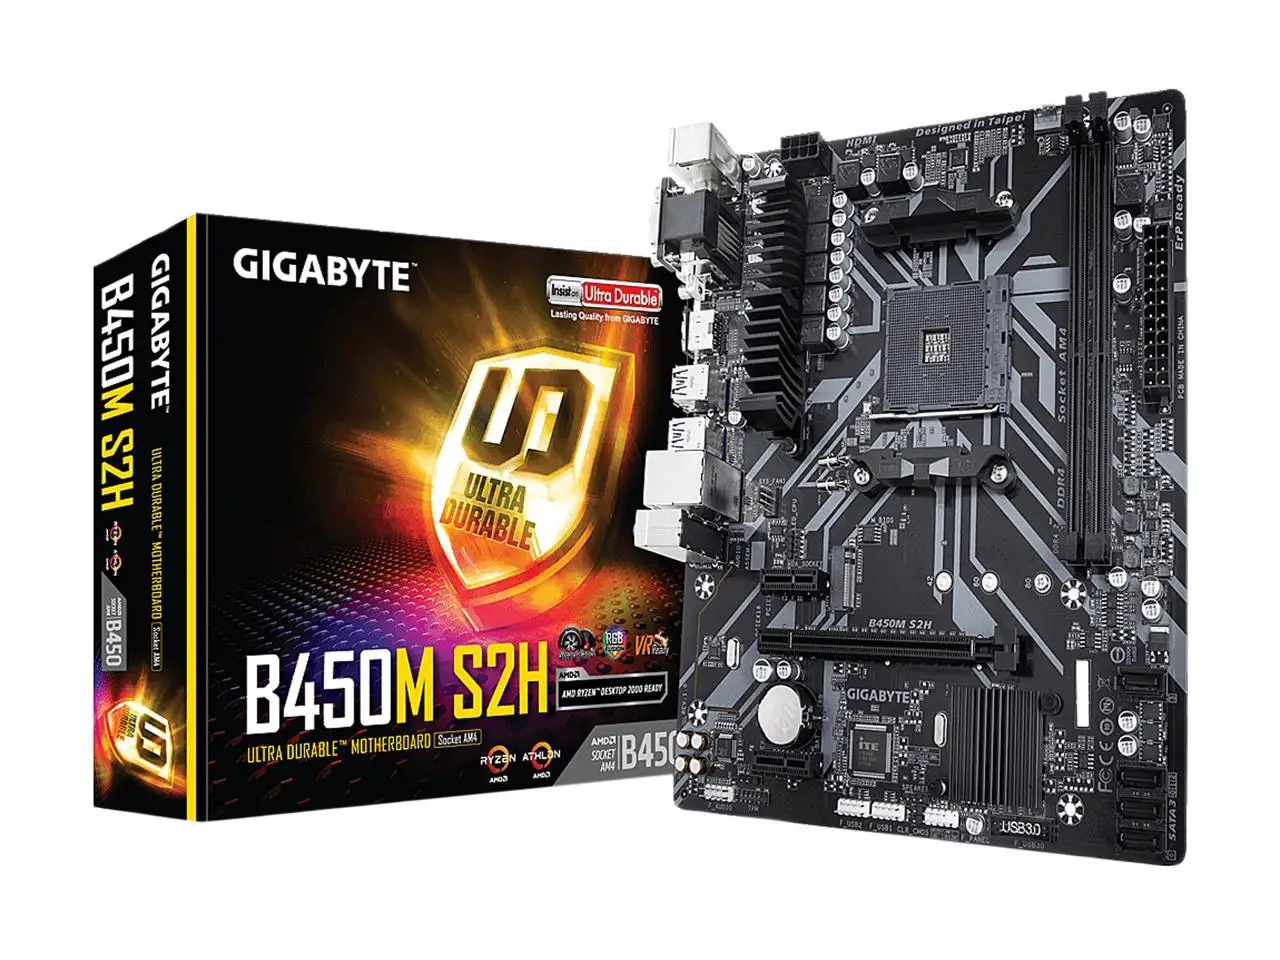 

B450 Socket AM4 For Gigabyte B450M S2H Motherboard 32GB DDR4 Micro ATX Mainboard 100% Tested Fully Work